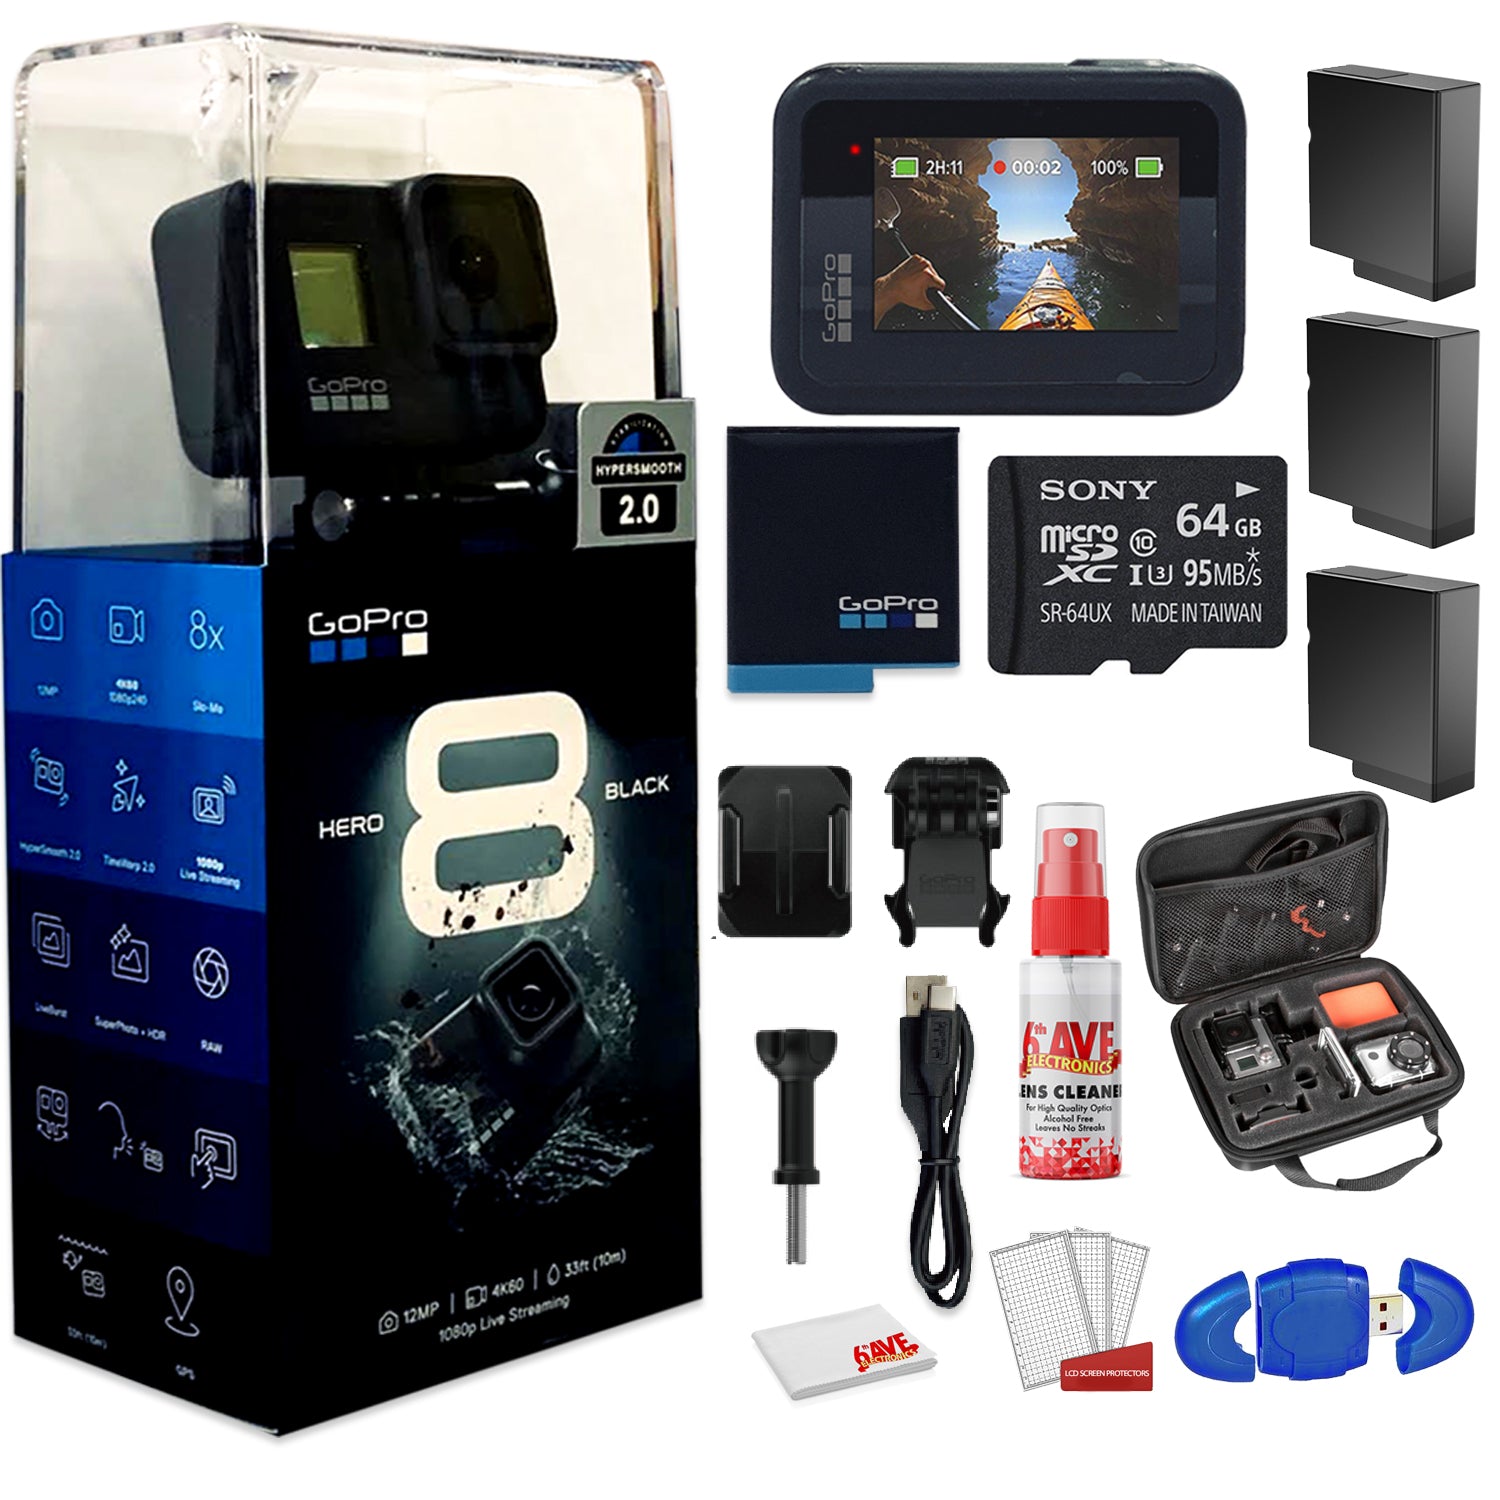 GoPro HERO8 Black Digital Action Camera - Waterproof - With Cleaning Set + Case + 64GB Memory Card and 3 x Extra Batteries